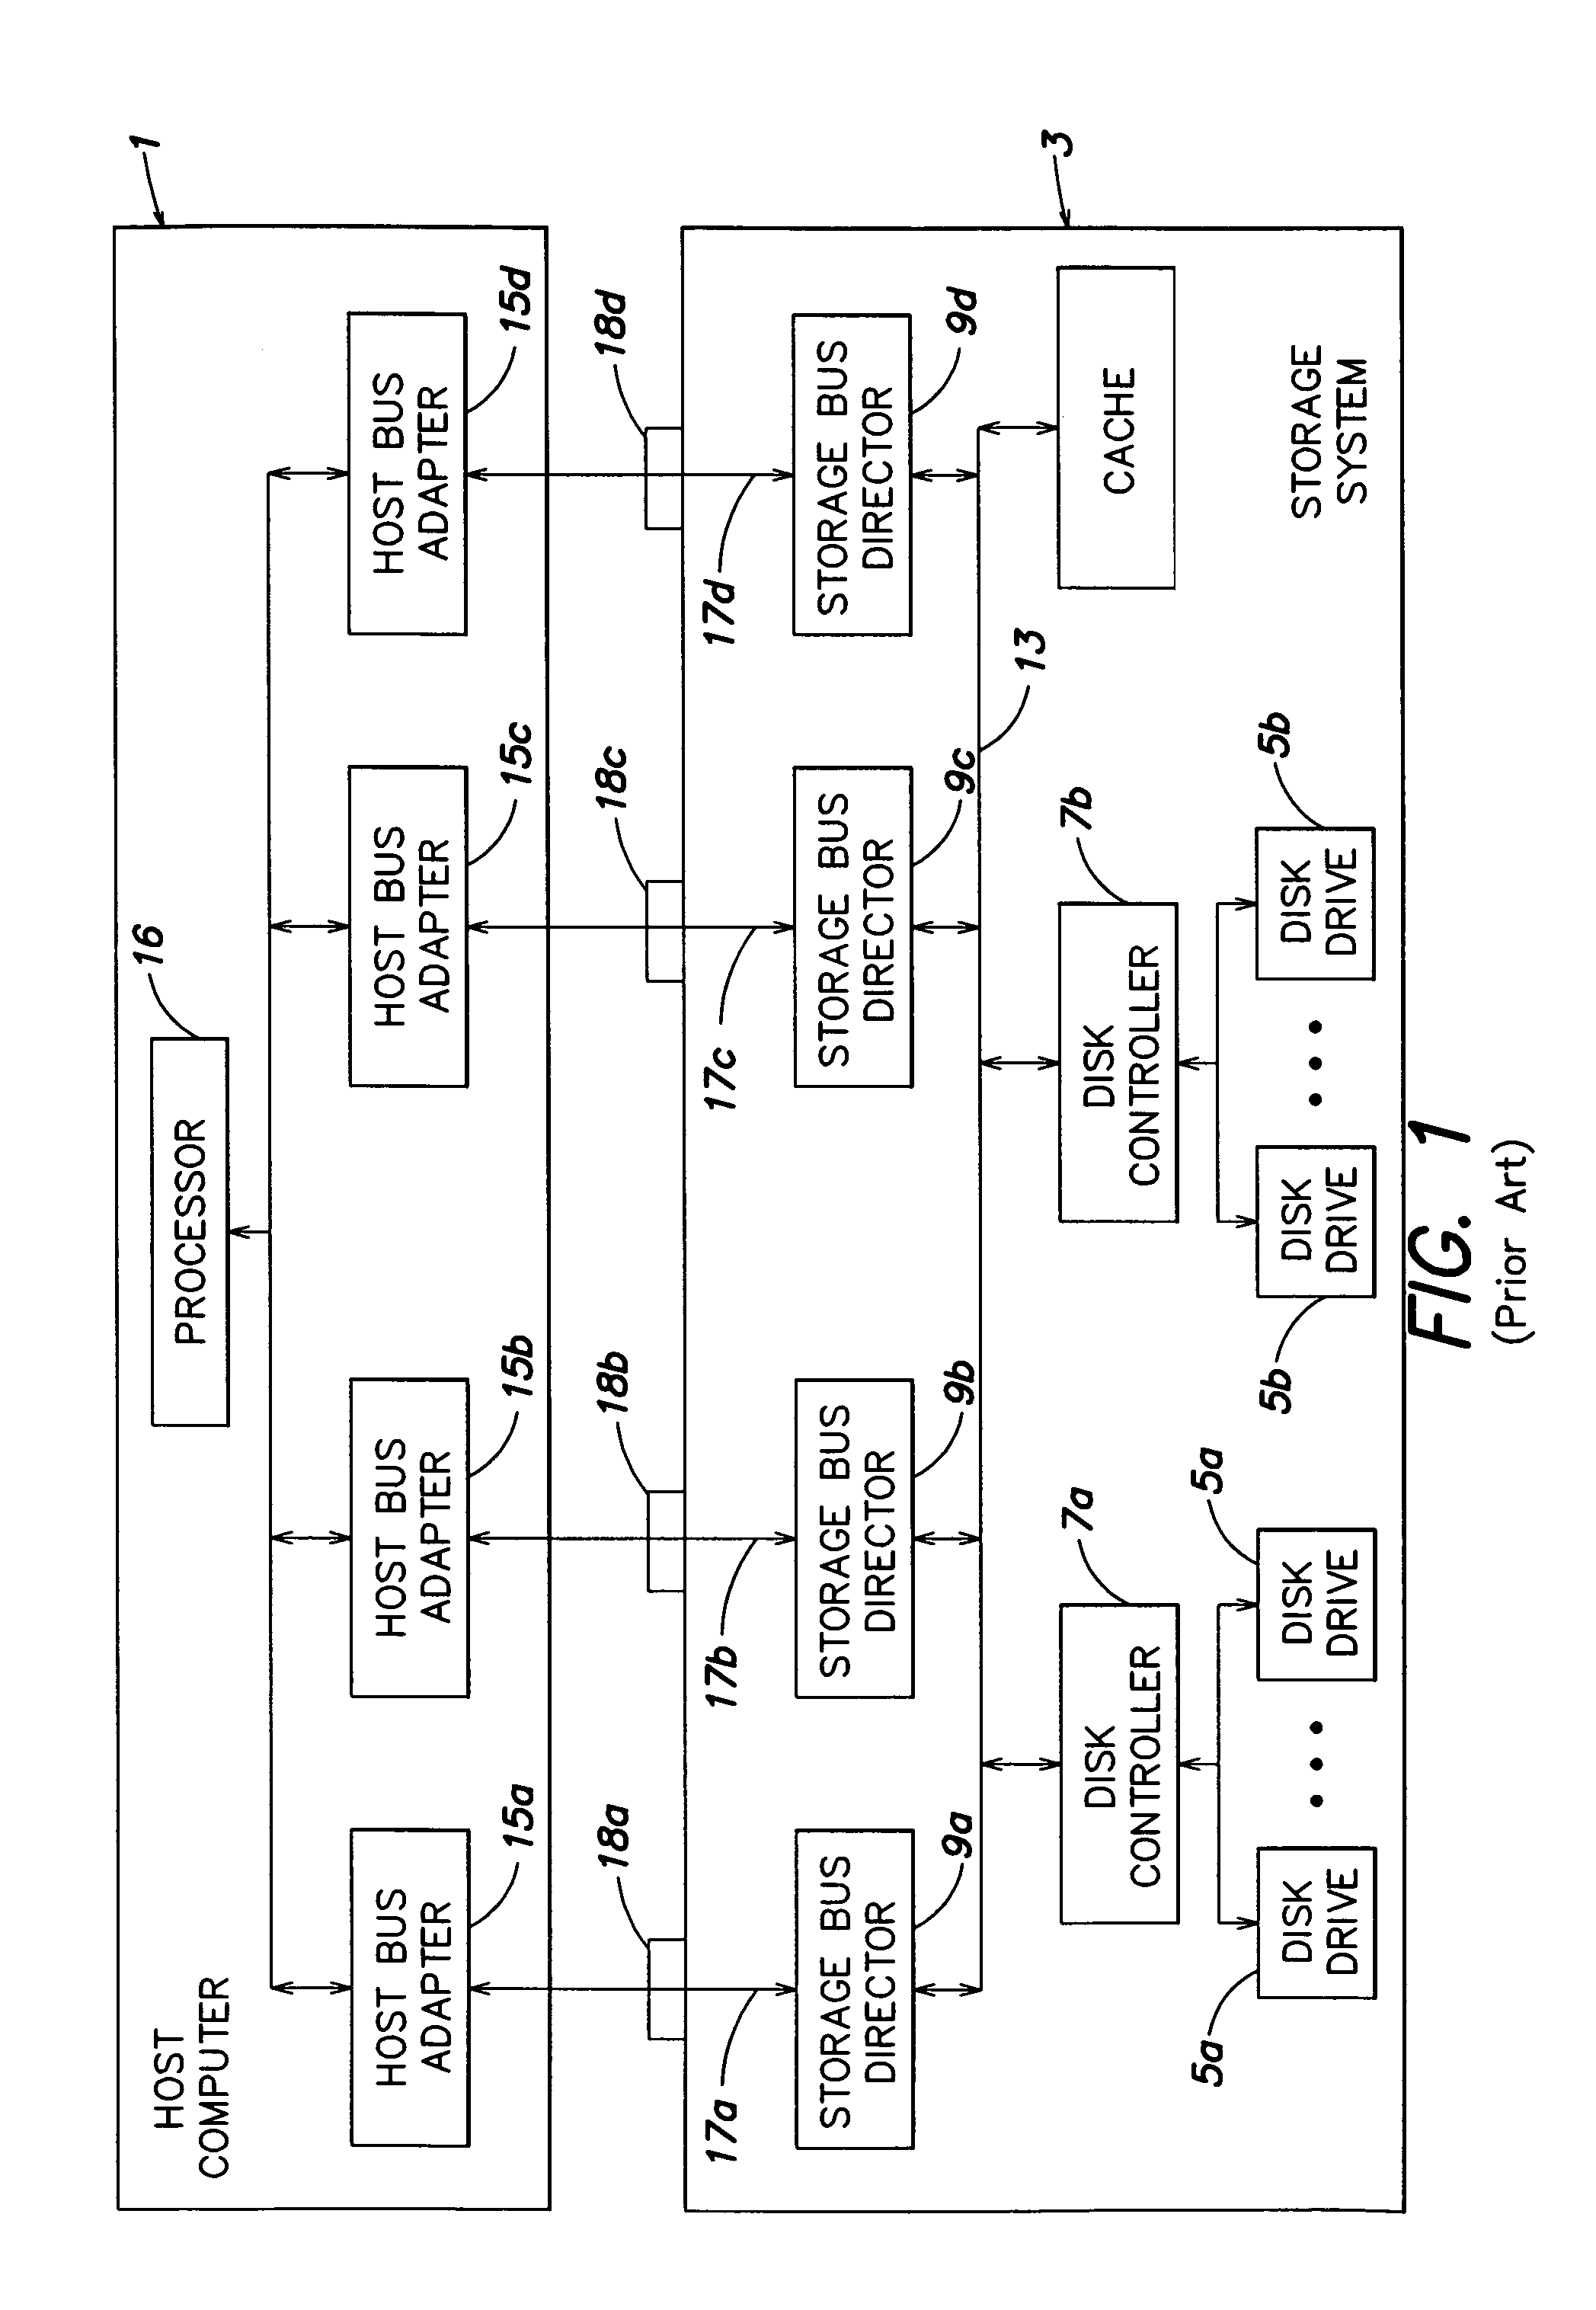 Method and apparatus for dynamically modifying a computer system configuration